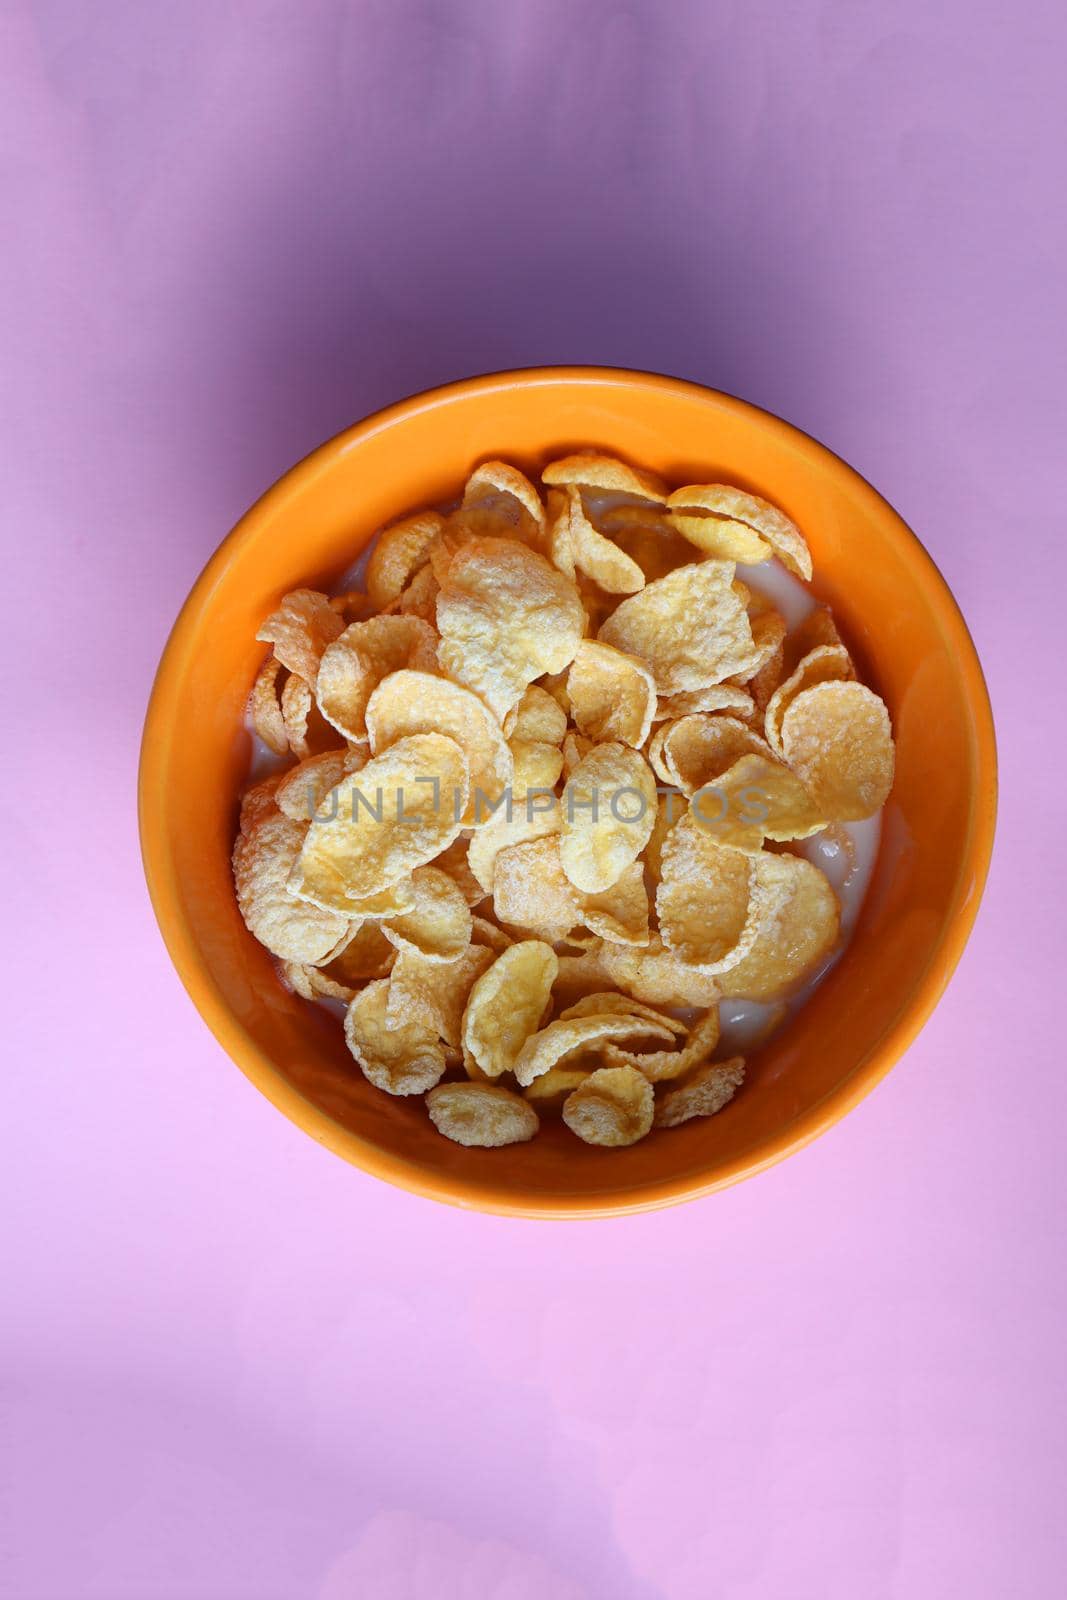 Cornflakes  in an orange plate. Orange plate on a pink background